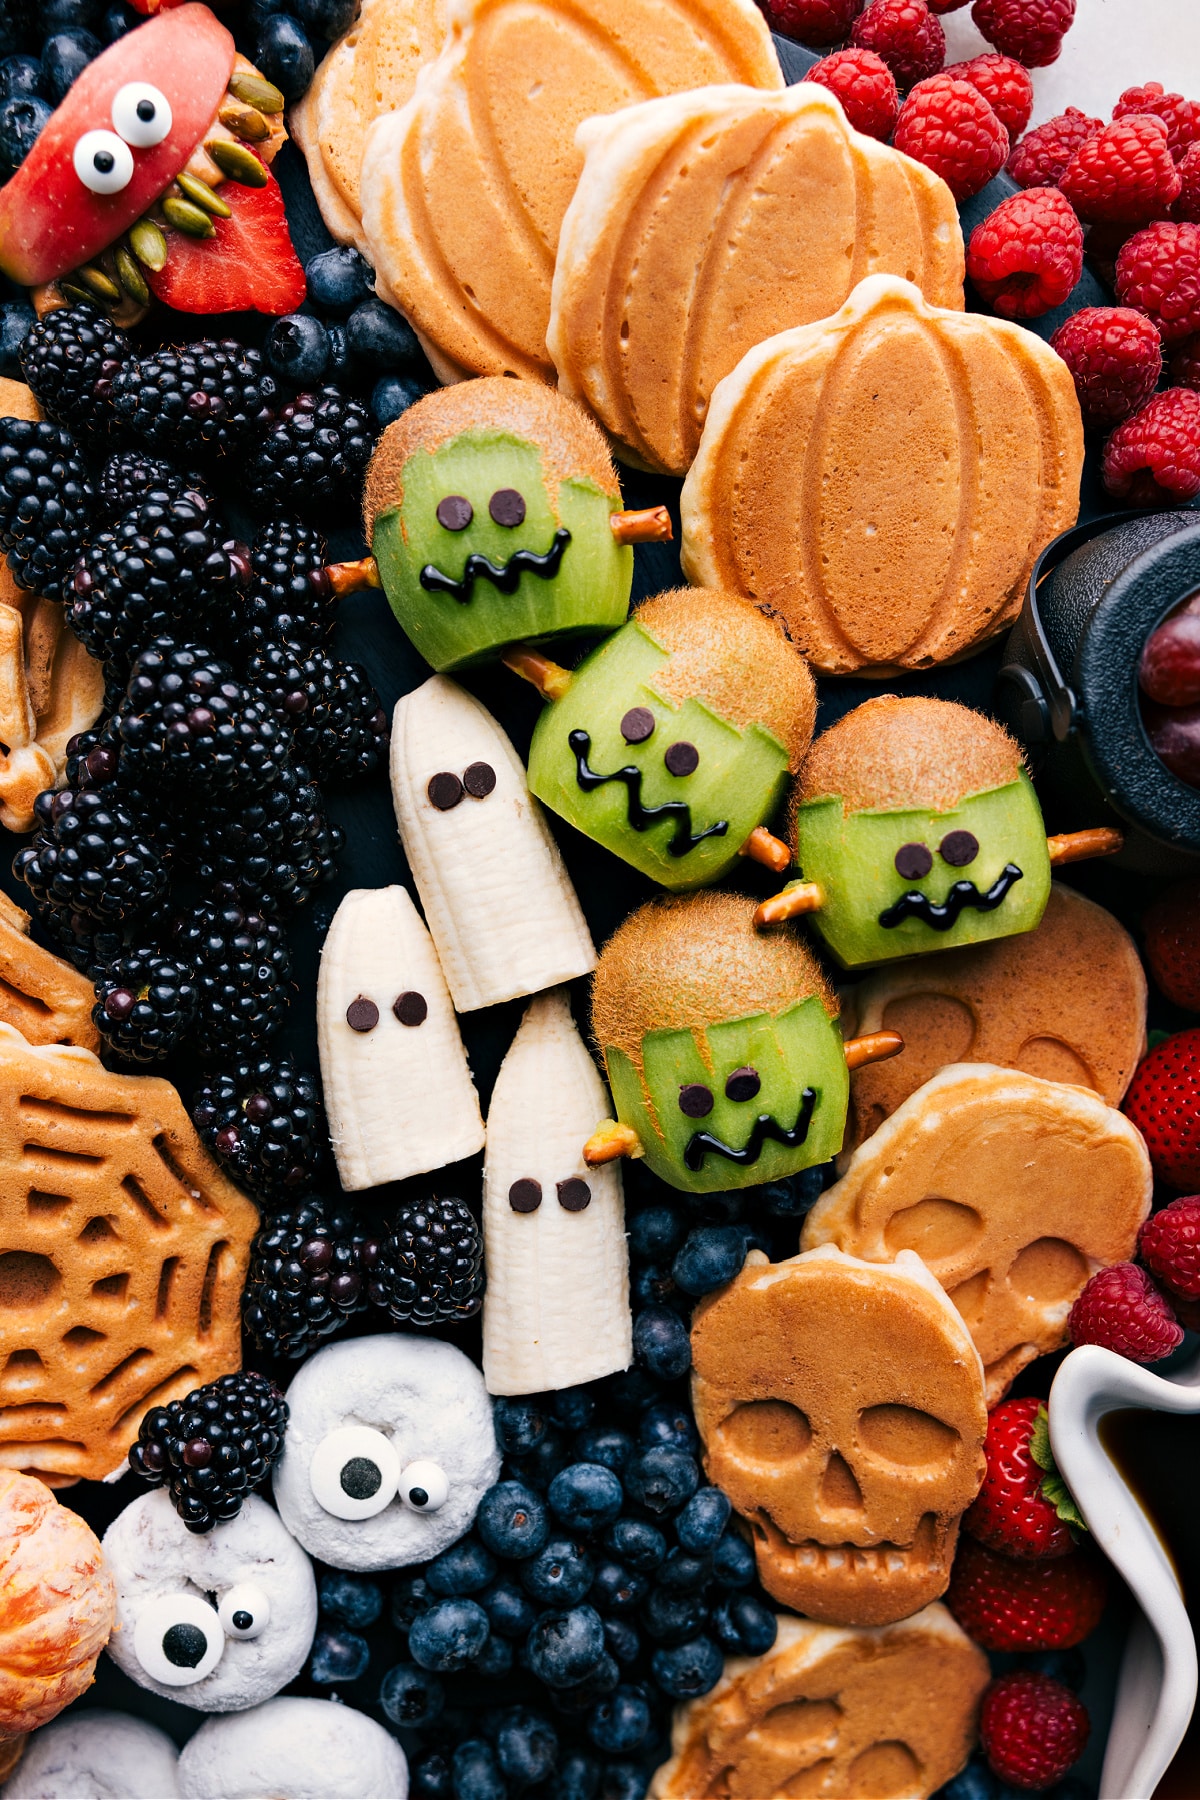 Tray filled with a spooky selection of Halloween breakfast ideas.